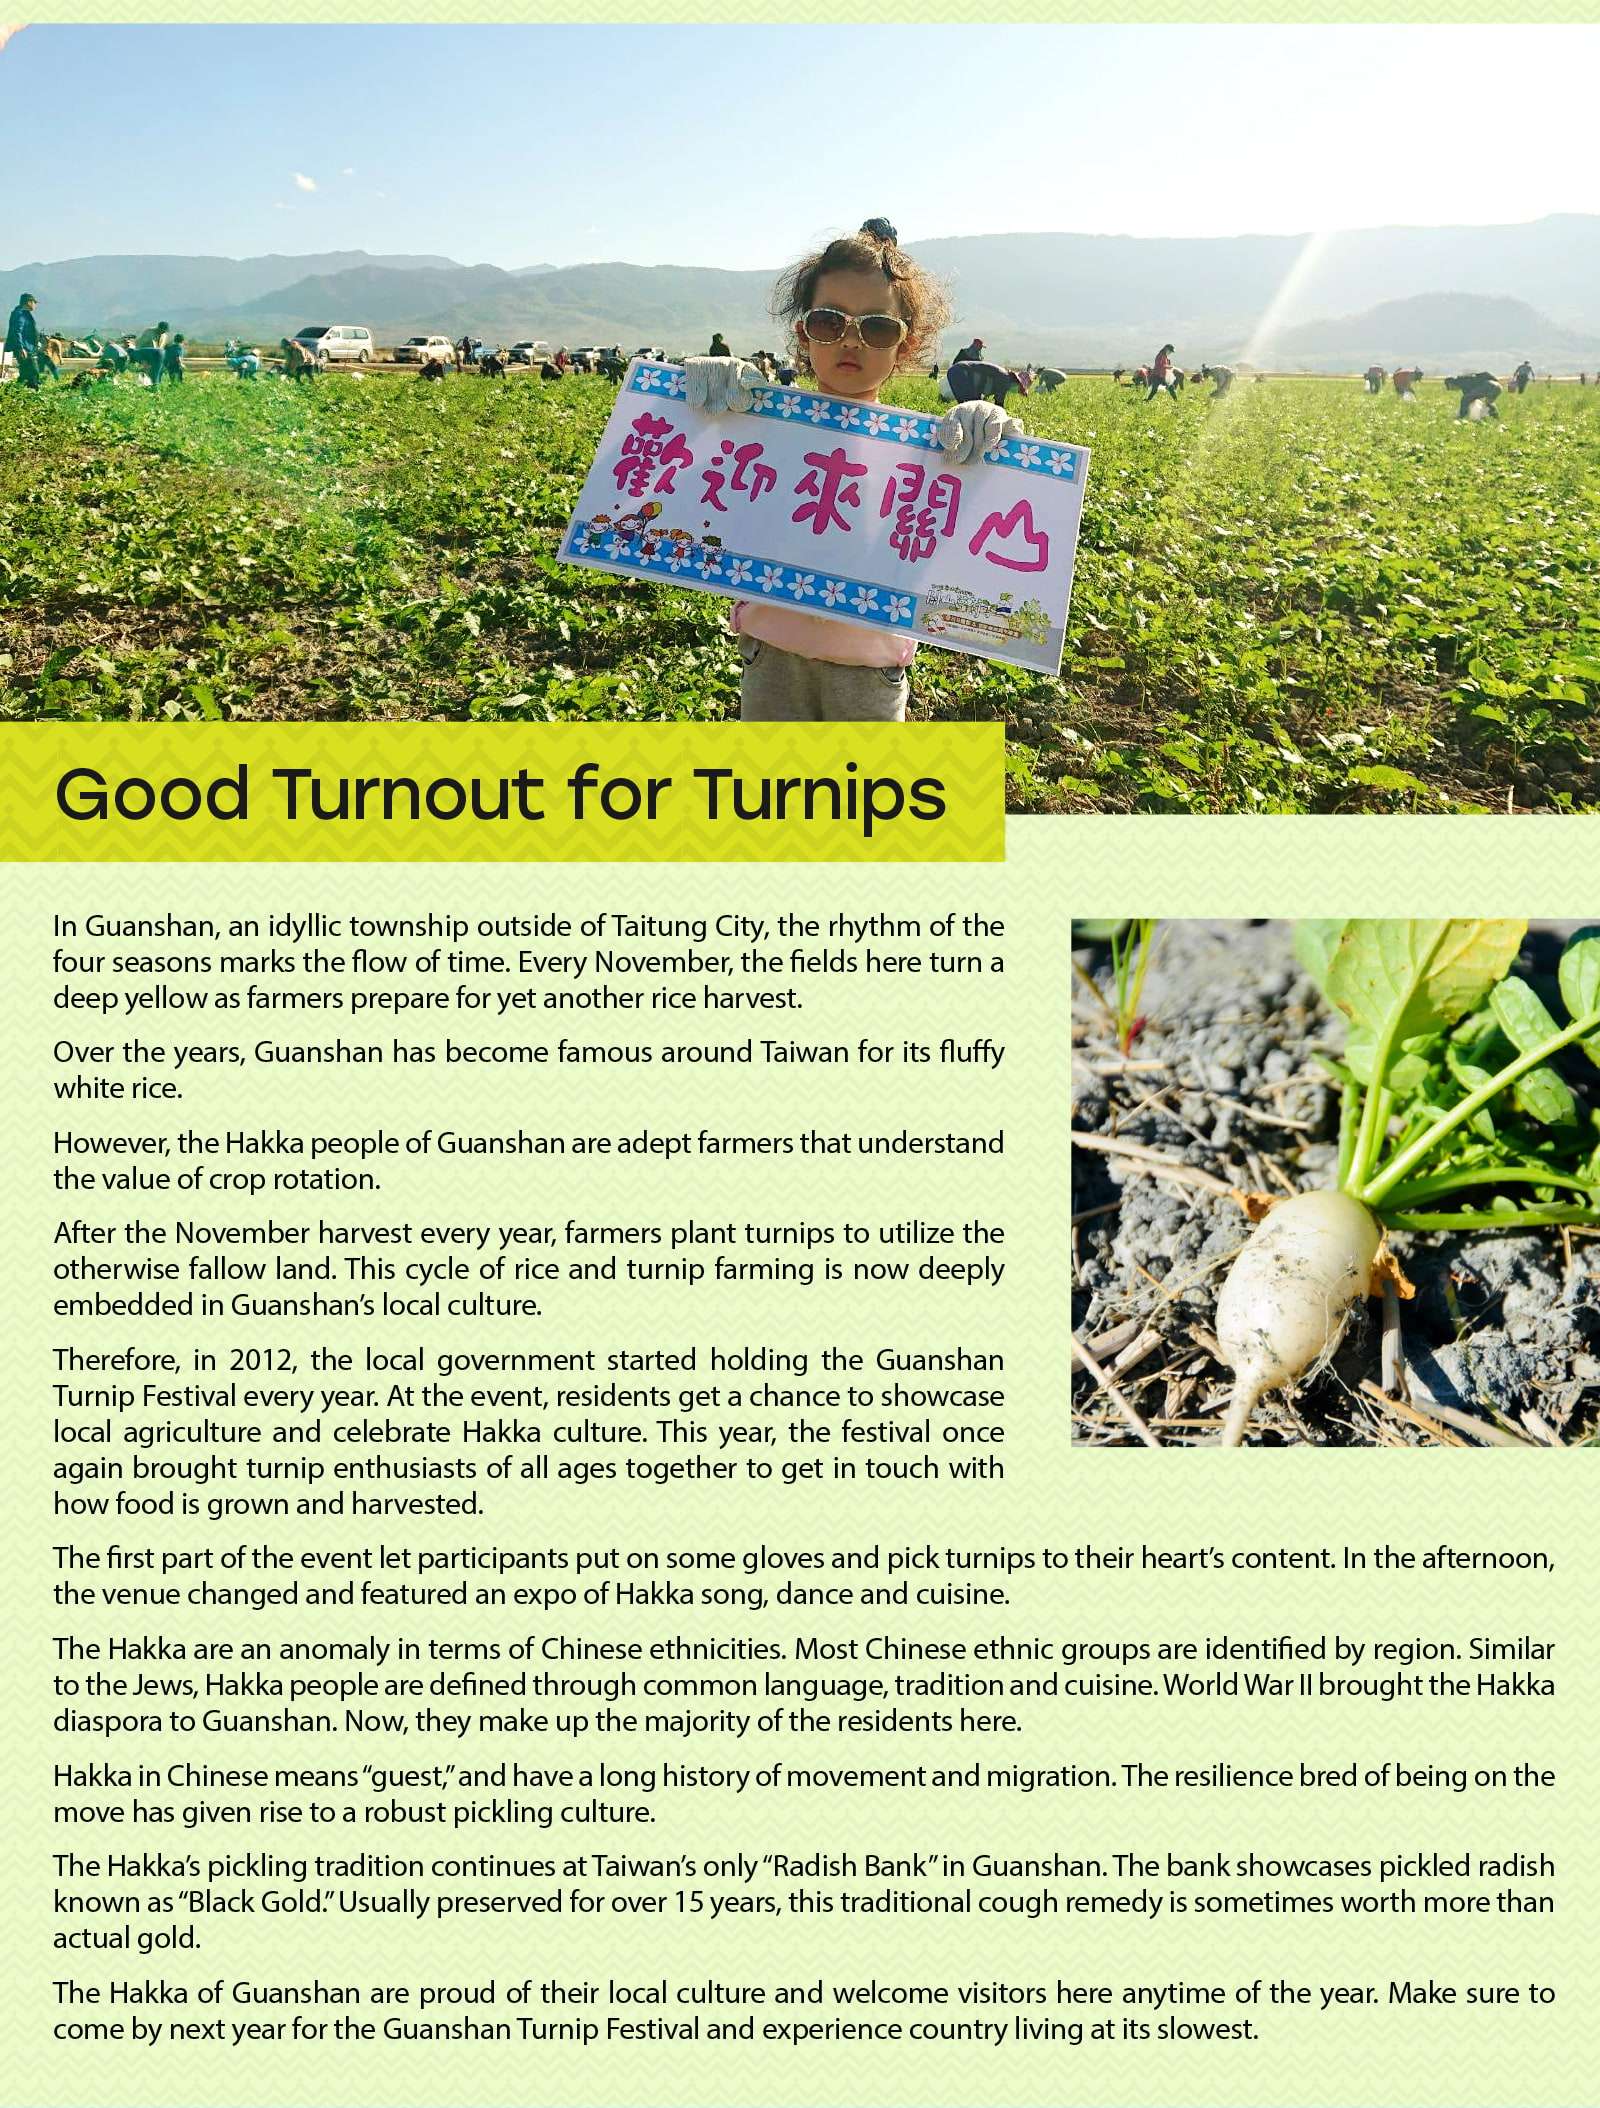 Good Turnout for Turnips

In Guanshan, an idyllic township outside of Taitung City, the rhythm of the four seasons marks the flow of time. Every November, the fields here turn a deep yellow as farmers prepare for yet another rice harvest.  
	Over the years, Guanshan has become famous around Taiwan for its fluffy white rice. 
However, the Hakka people of Guanshan are adept farmers that understand the value of crop rotation. 
After the November harvest every year, farmers plant turnips to utilize the otherwise fallow land. This cycle of rice and turnip farming is now deeply embedded in Guanshan’s local culture.
	Therefore, in 2012, the local government started holding the Guanshan Turnip Festival every year. At the event, residents get a chance to showcase local agriculture and celebrate Hakka culture. This year, the festival once again brought turnip enthusiasts of all ages together to get in touch with how food is grown and harvested. 
The first part of the event let participants put on some gloves and pick turnips to their heart’s content. In the afternoon, the venue changed and featured an expo of Hakka song, dance and cuisine. 
	The Hakka are an anomaly in terms of Chinese ethnicities. Most Chinese ethnic groups are identified by region. Similar to the Jews, Hakka people are defined through common language, tradition and cuisine. World War II brought the Hakka diaspora to Guanshan. Now, they make up the majority of the residents here.
	Hakka in Chinese means “guest,” and have a long history of movement and migration. The resilience bred of being on the move has given rise to a robust pickling culture.
	The Hakka’s pickling tradition continues at Taiwan’s only “Radish Bank” in Guanshan. The bank showcases pickled radish known as “Black Gold.” Usually preserved for over 15 years, this traditional cough remedy is sometimes worth more than actual gold. 
	The Hakka of Guanshan are proud of their local culture and welcome visitors here anytime of the year. Make sure to come by next year for the Guanshan Turnip Festival and experience country living at its slowest. 
